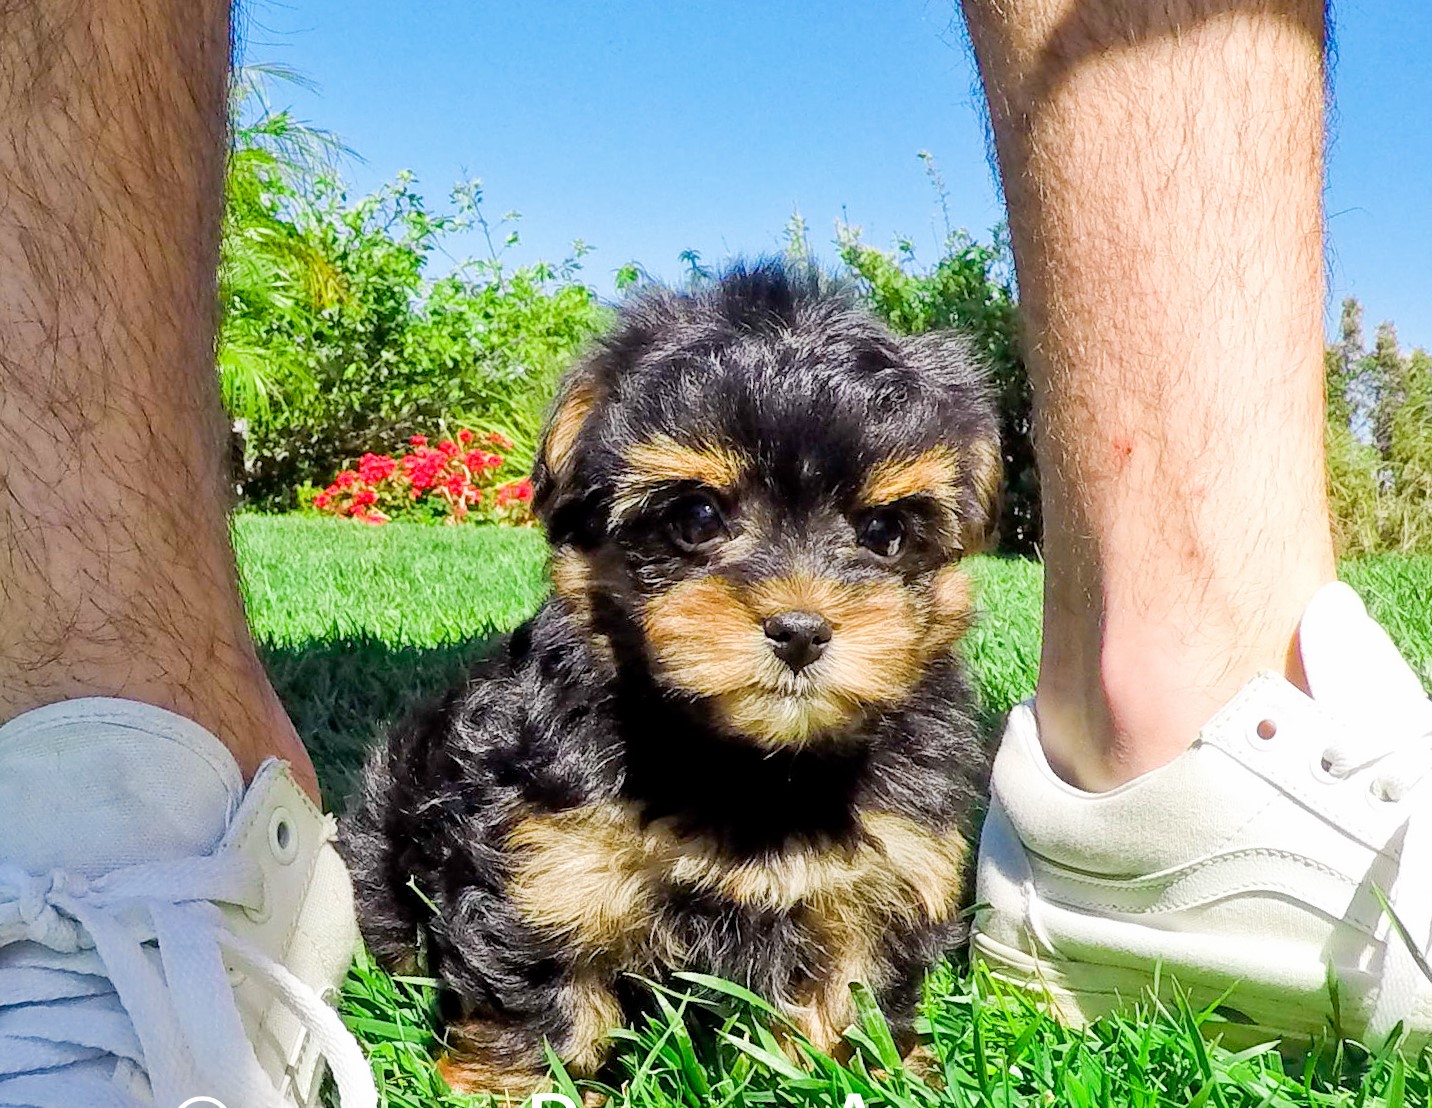 cheap yorkie poo puppies for sale near me